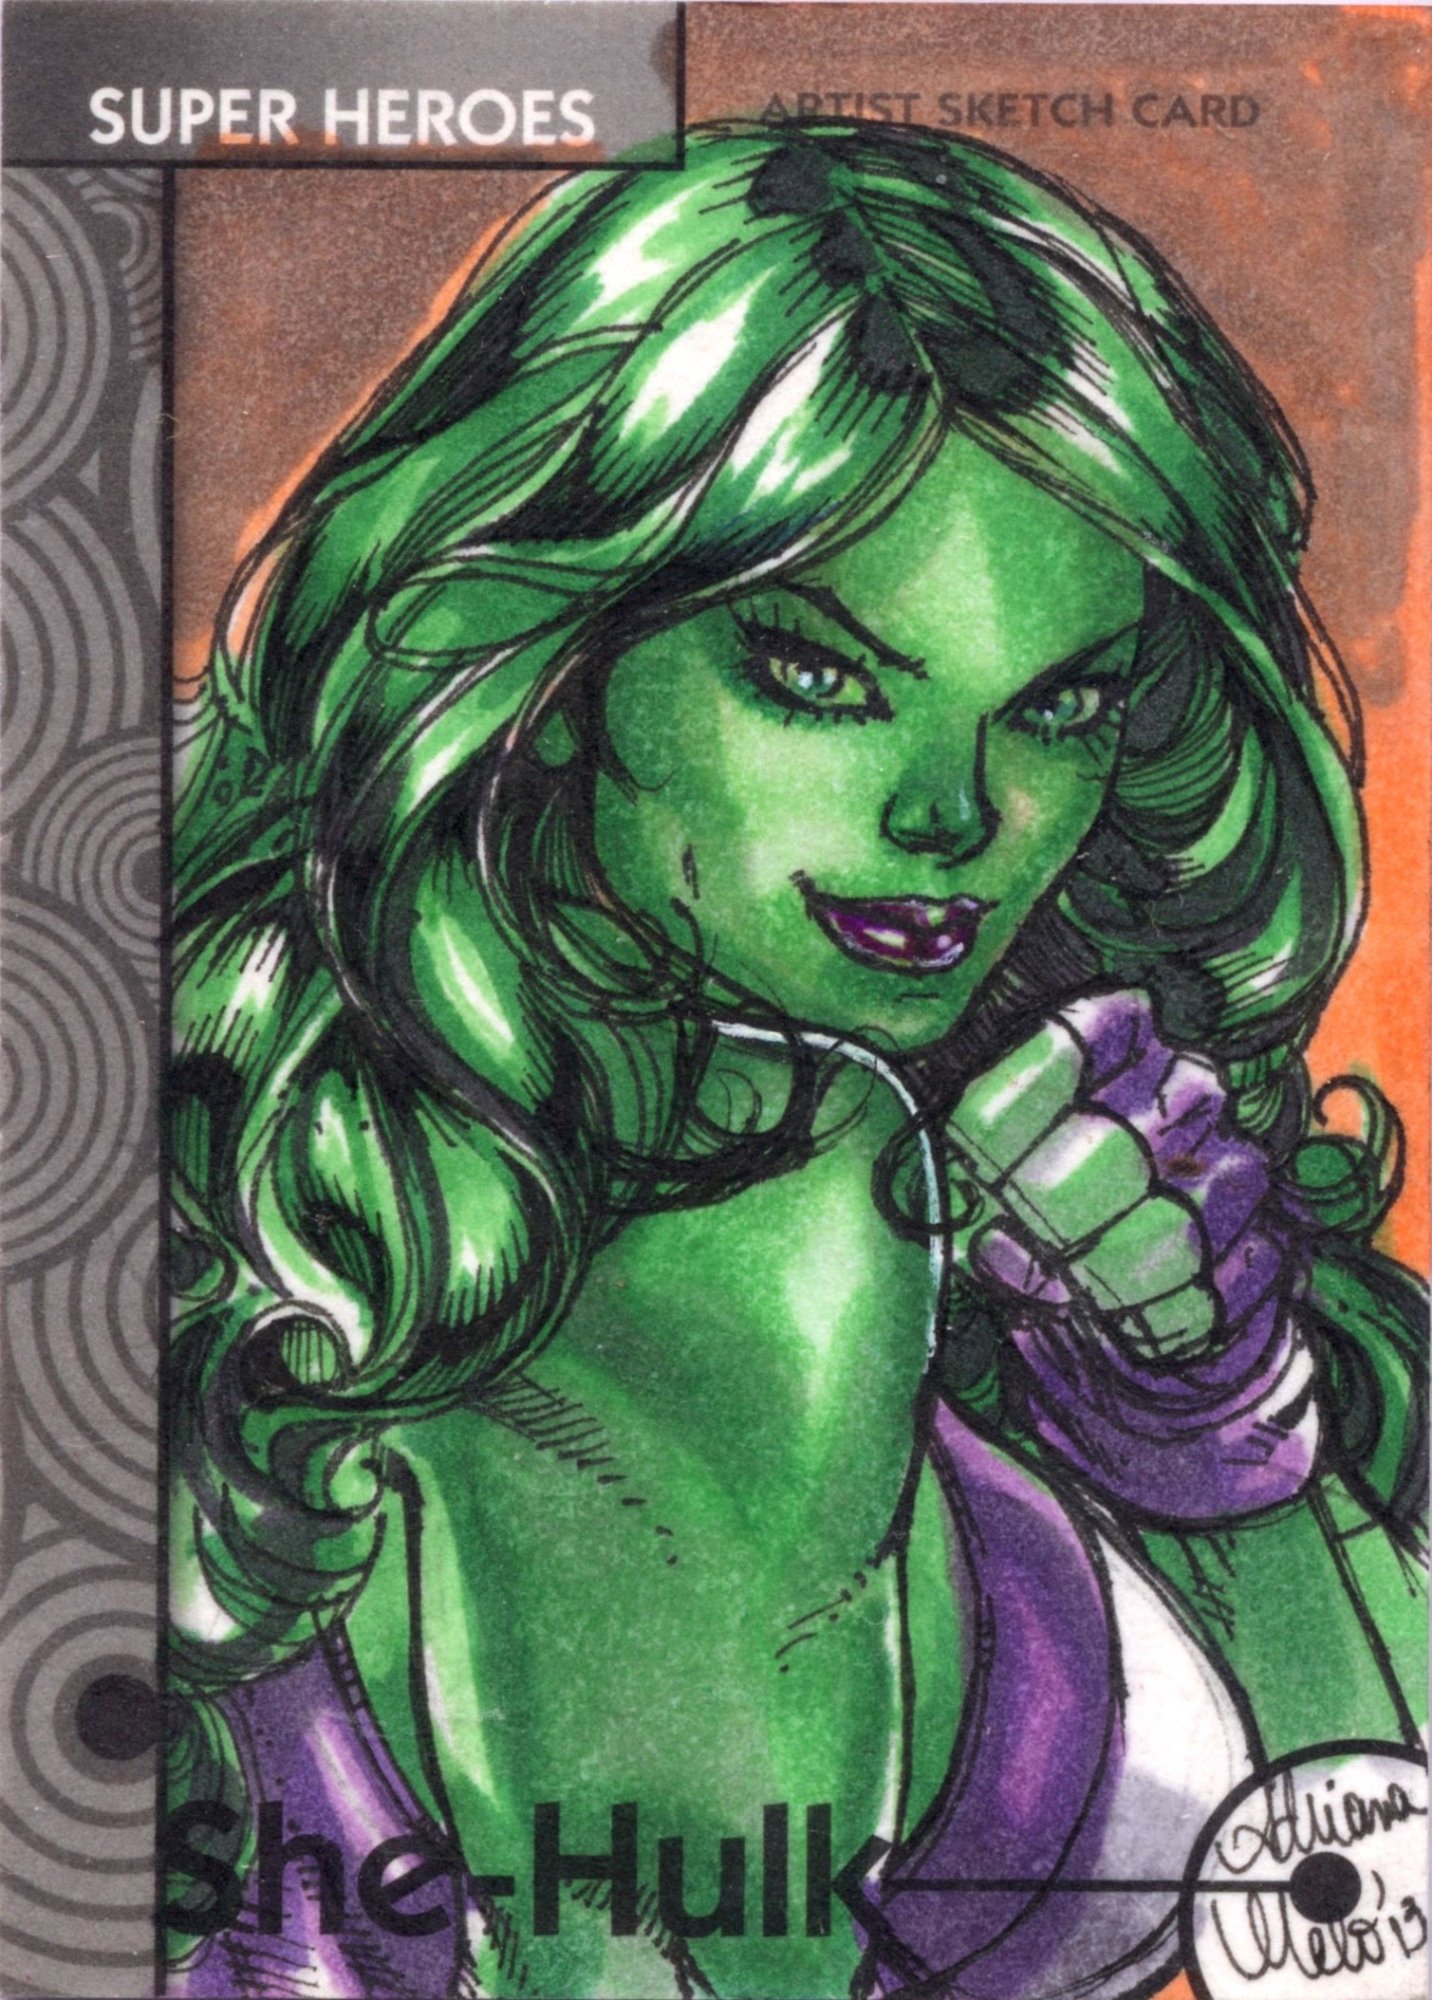 looking over the SpiderIsland character designs when I noticed Ramos  DEFINITELY put nips on this Adriana Soria sketch NSFW  rMarvel